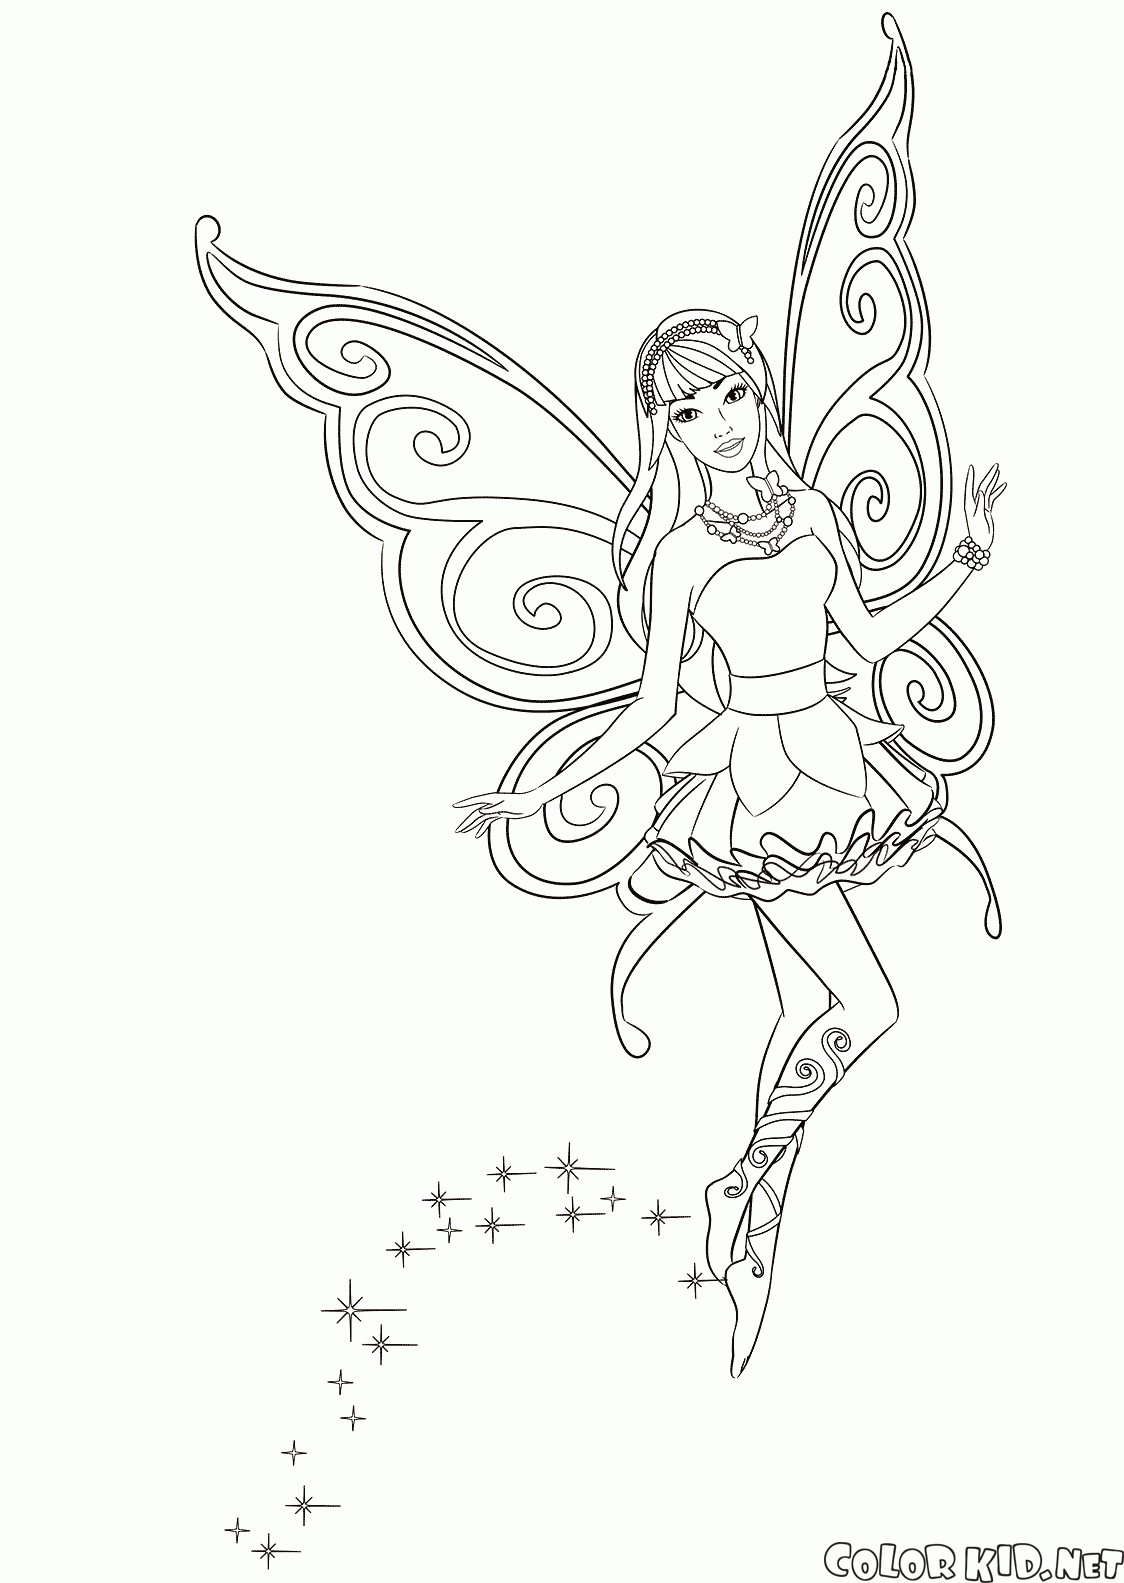 Fairy loves to fly